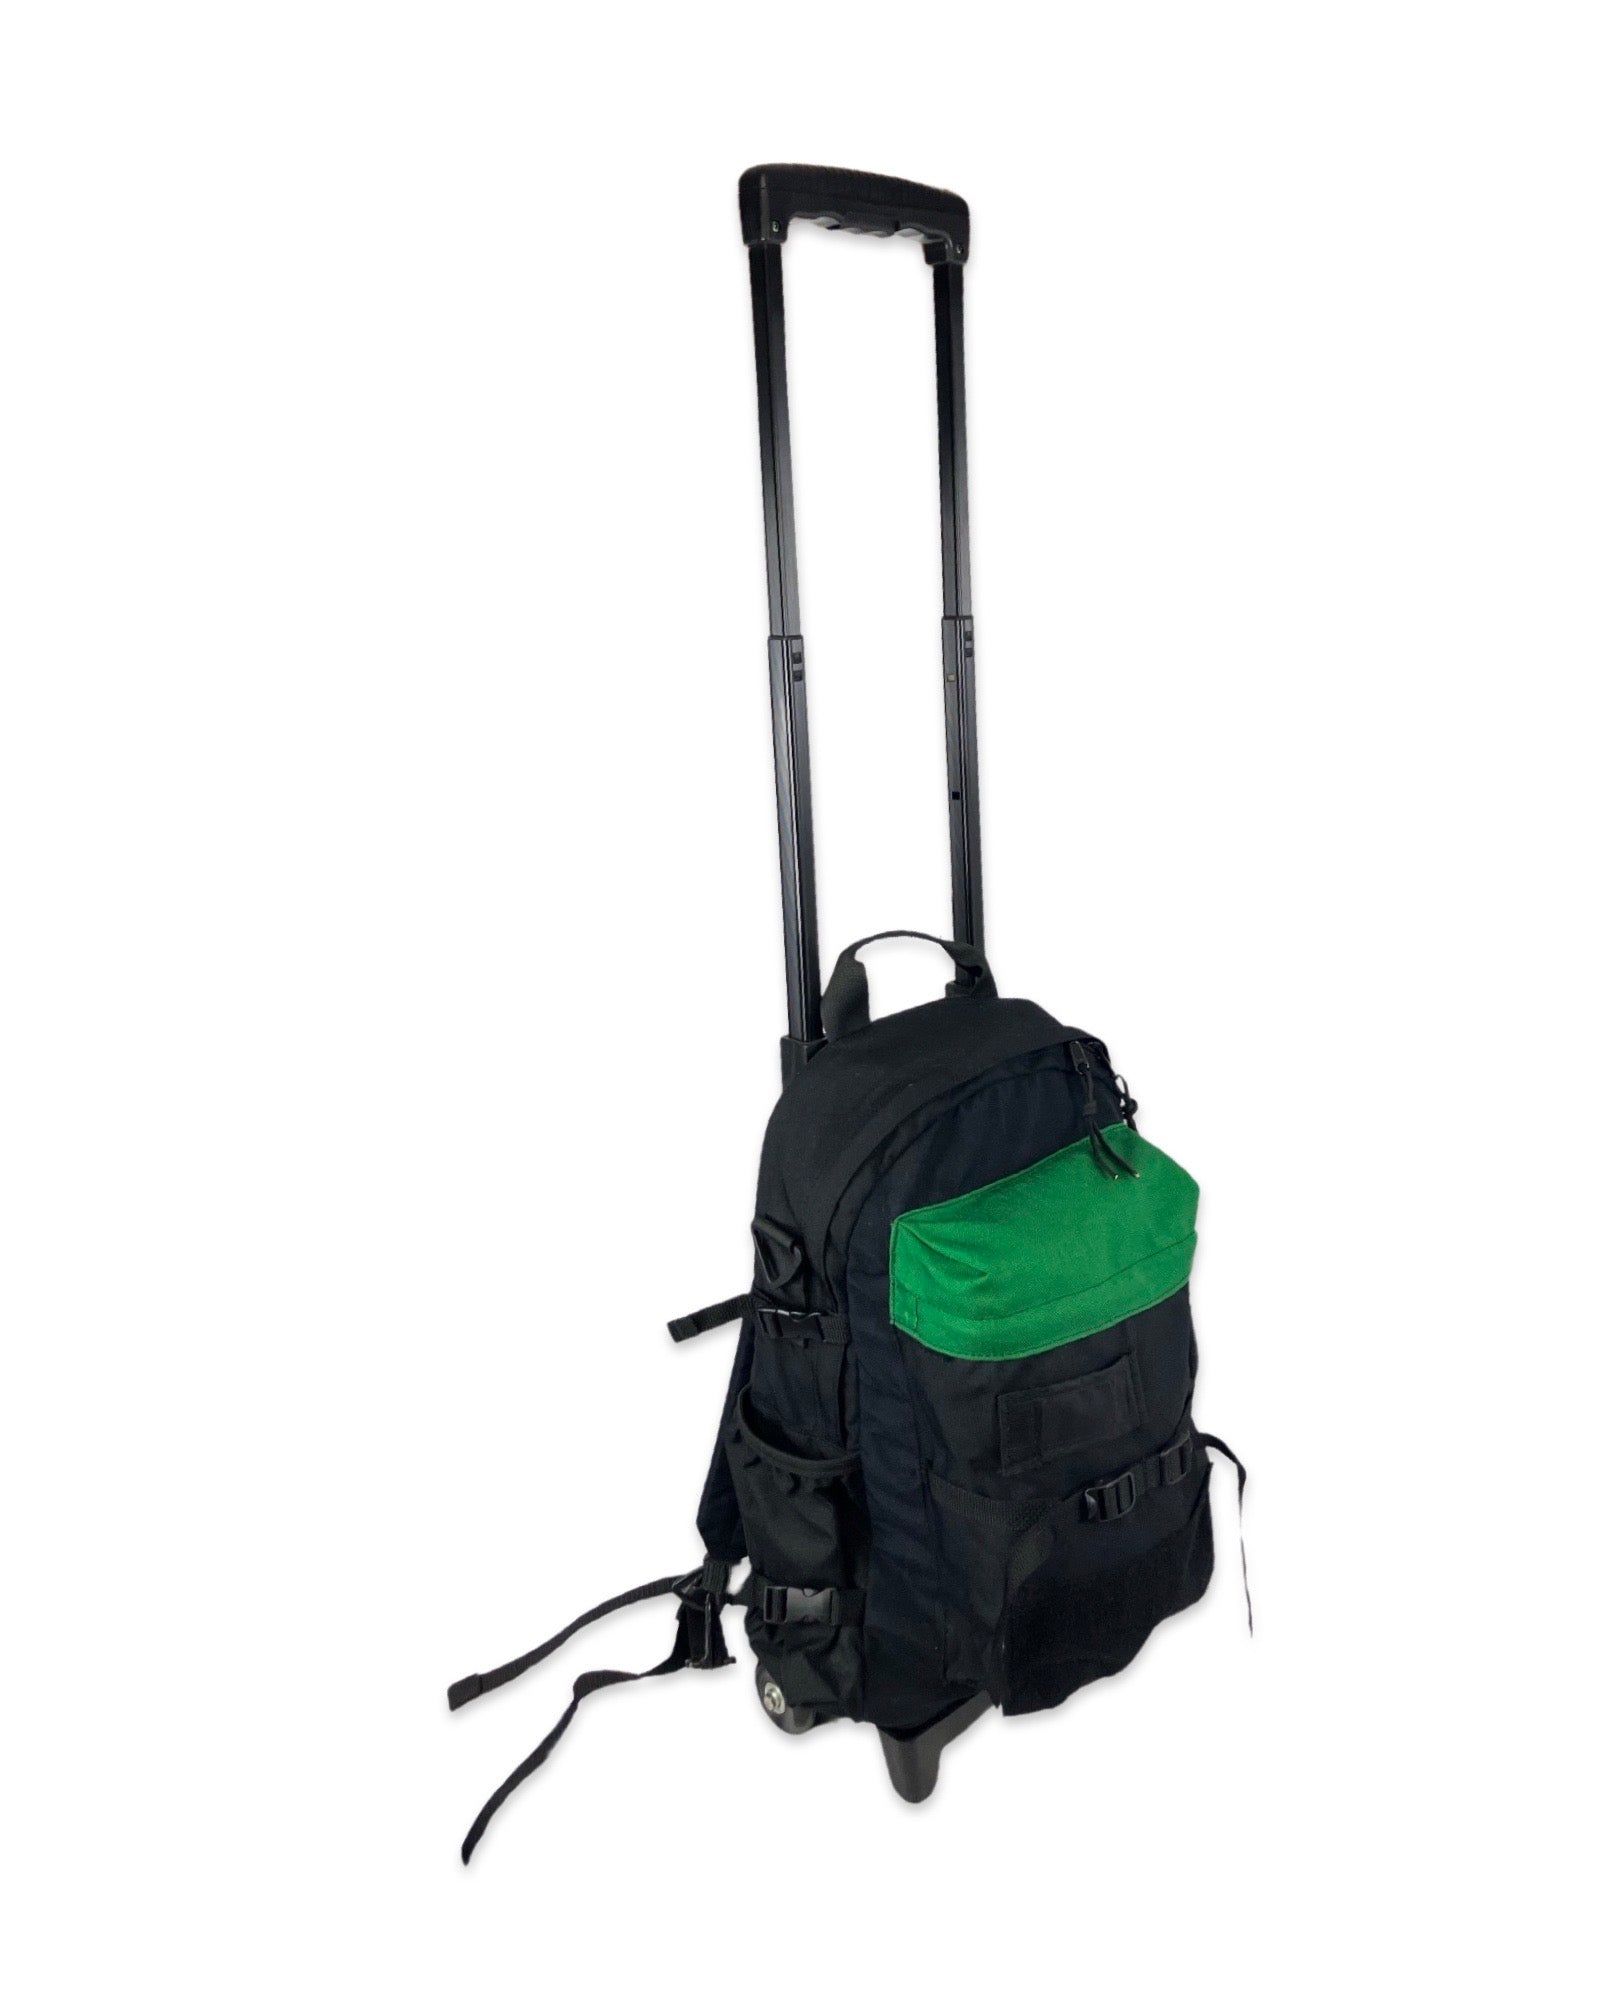 TIMBER Rolling Pack Wheeled Bags, by Tough Traveler. Made in USA since 1970